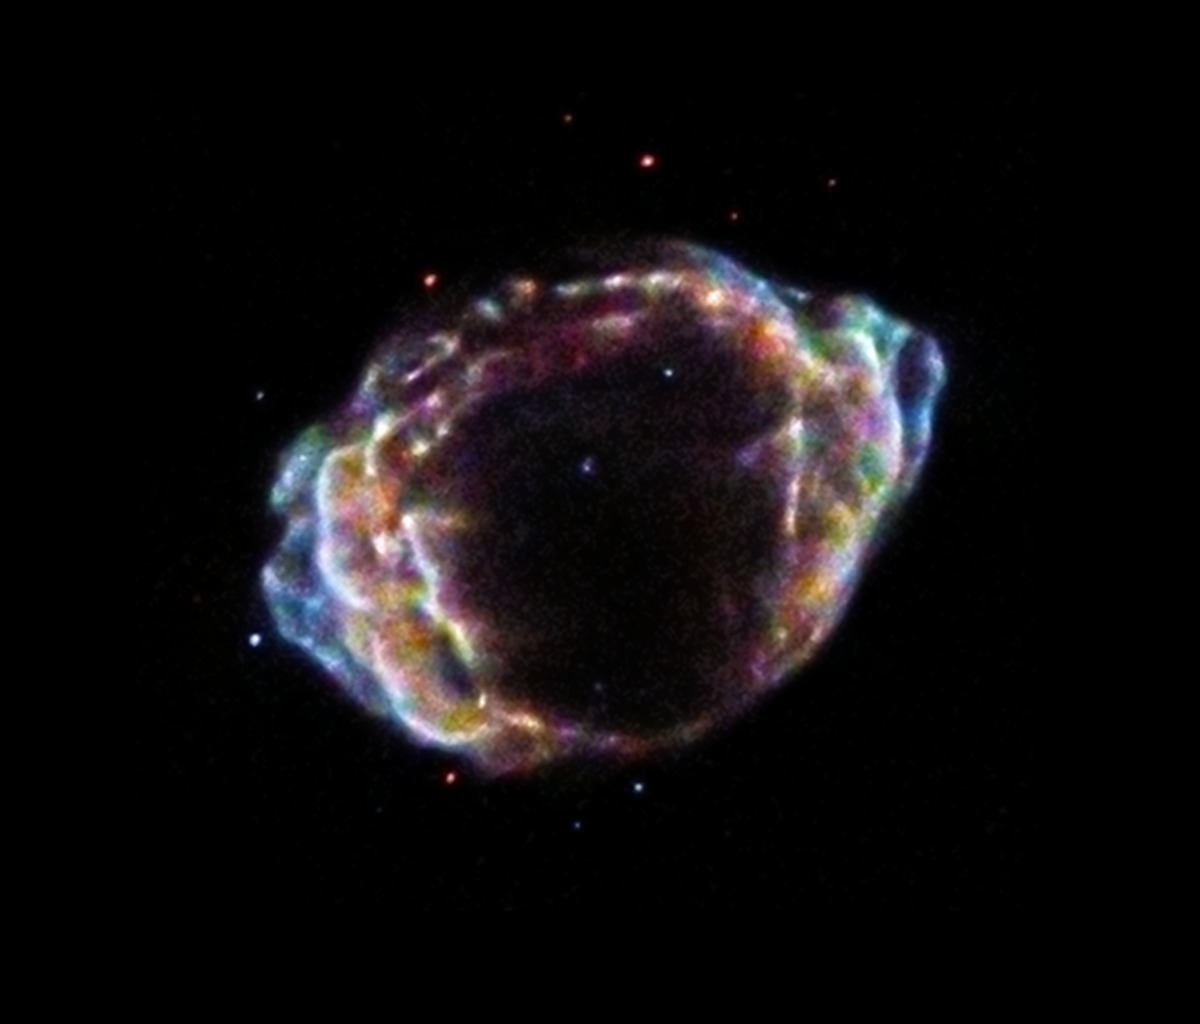 X-ray image of the G19 remnant.